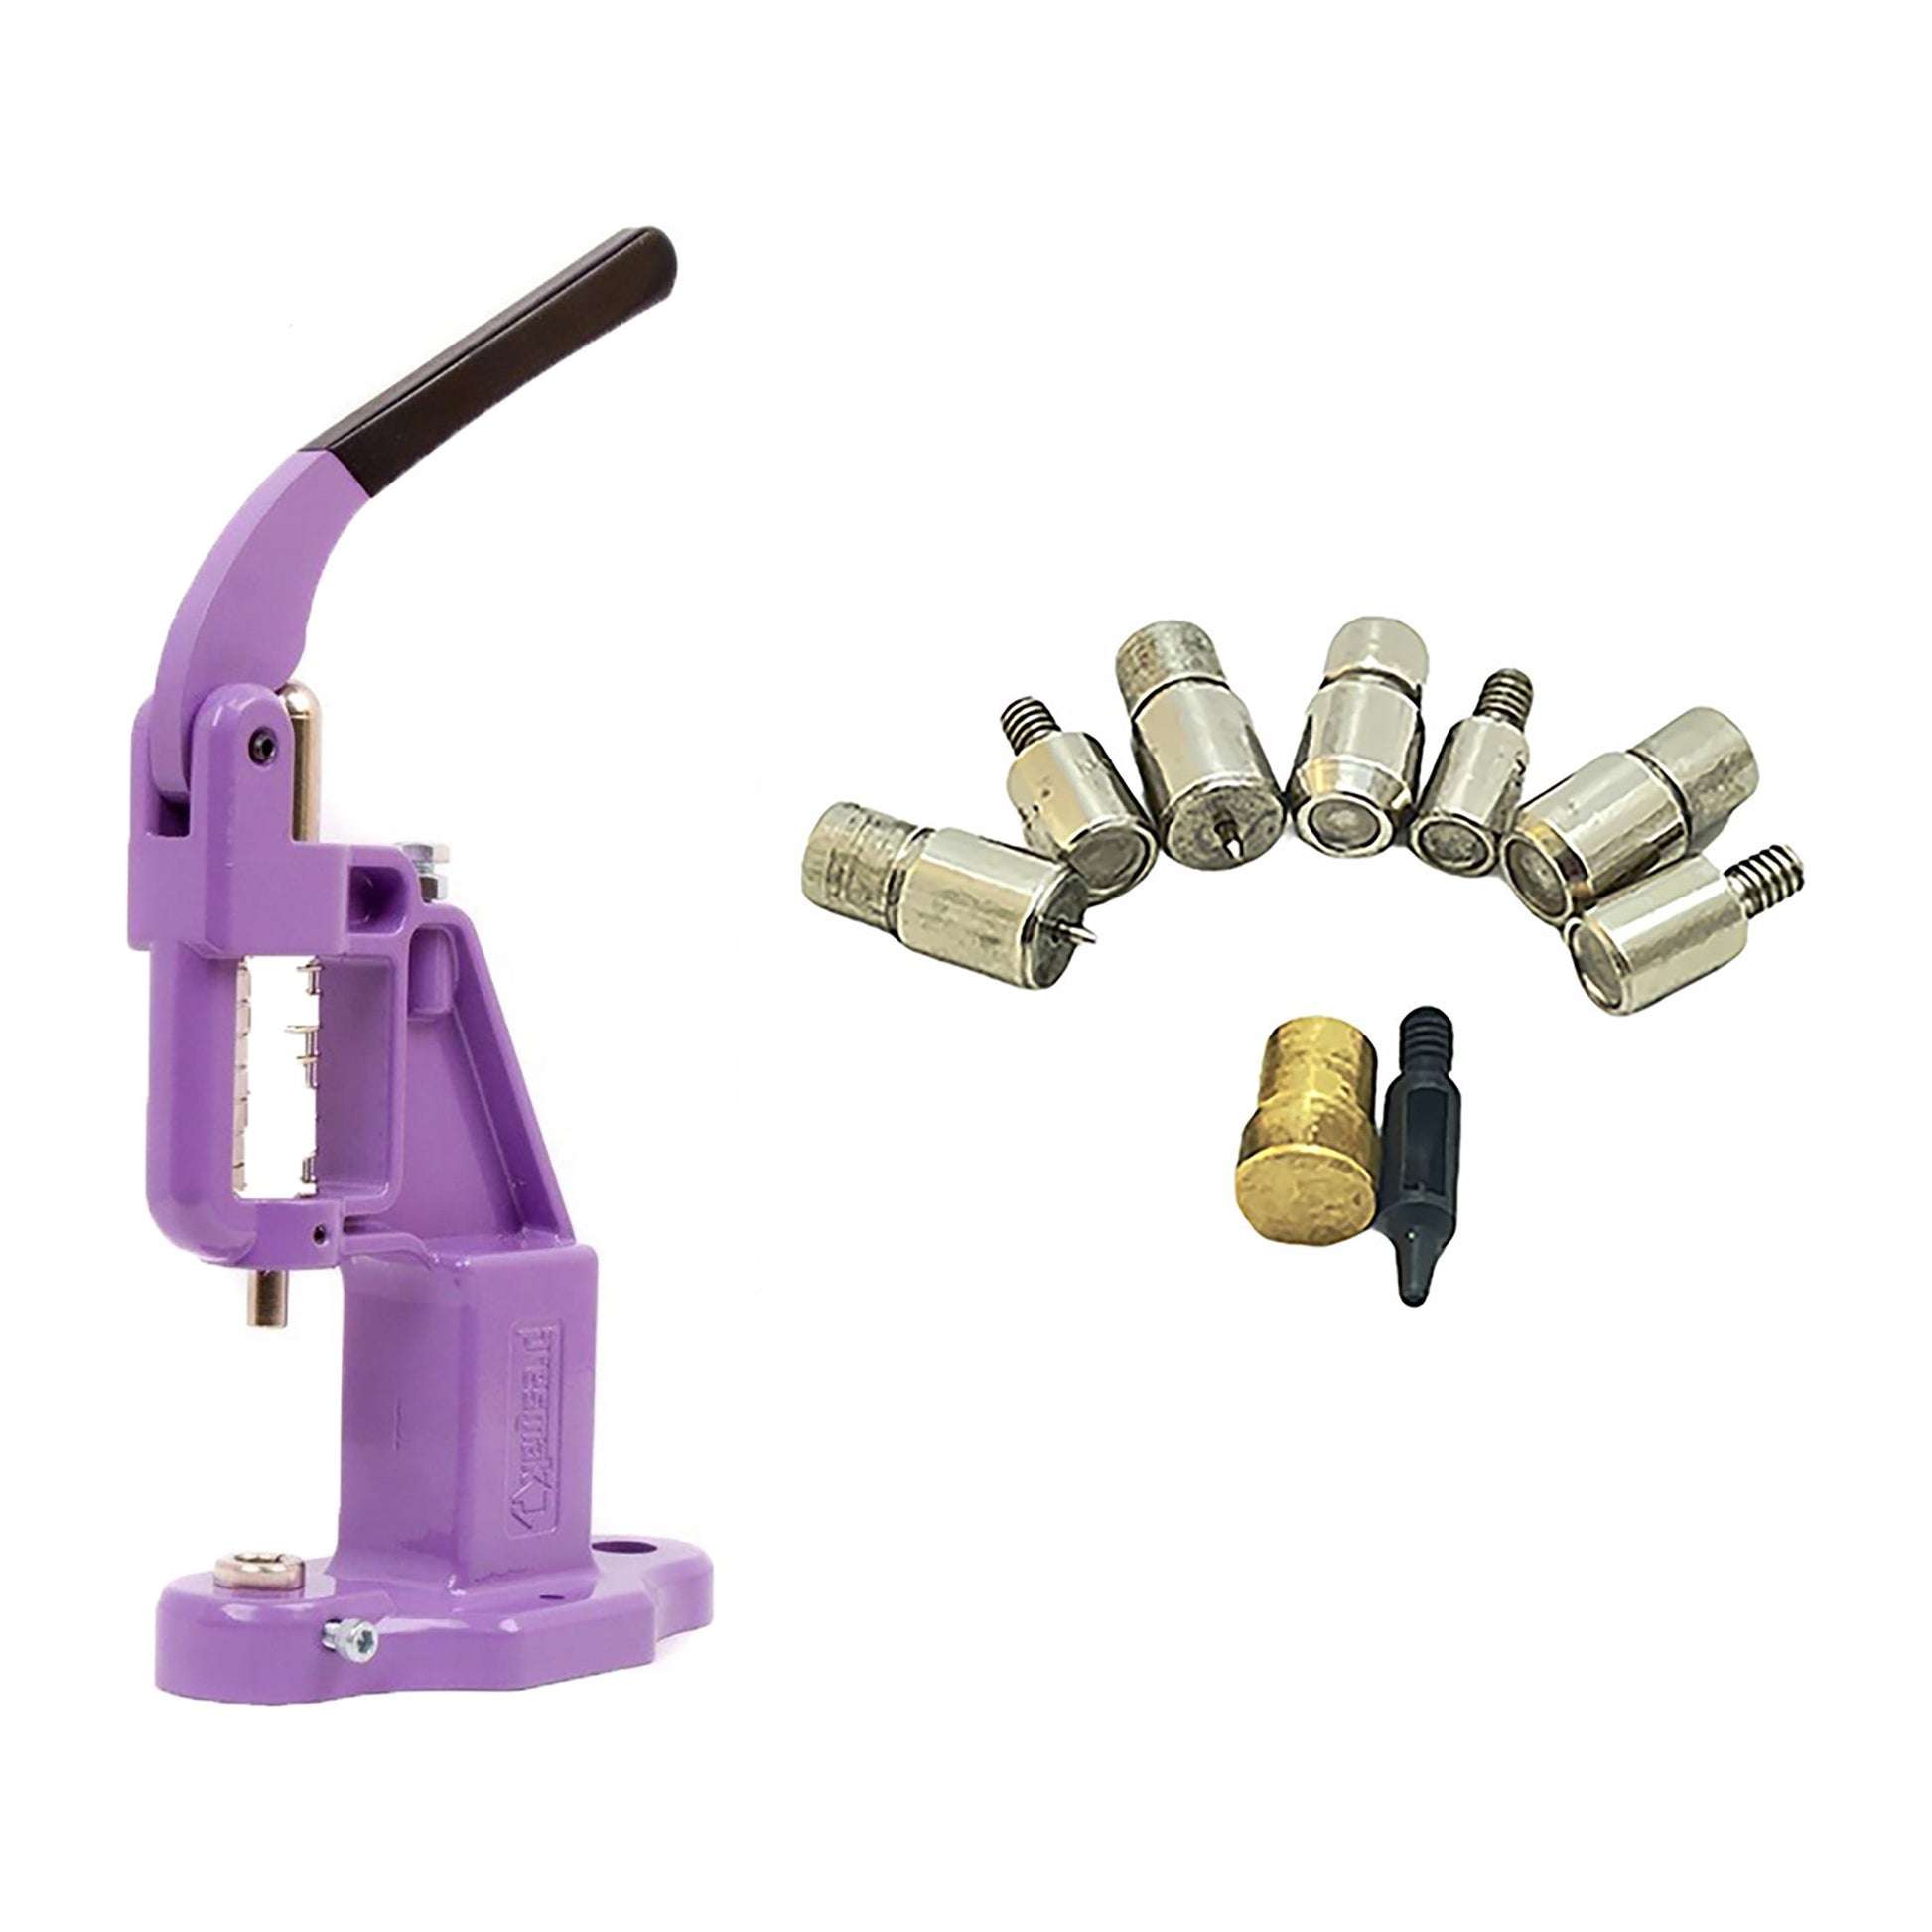 YF Store Rivet Press Machine with Essential Rivet Dies - Rivet Setting Kit for 7 mm and 9 mm Single and Double Cap Rivets for Garment and Bag Making